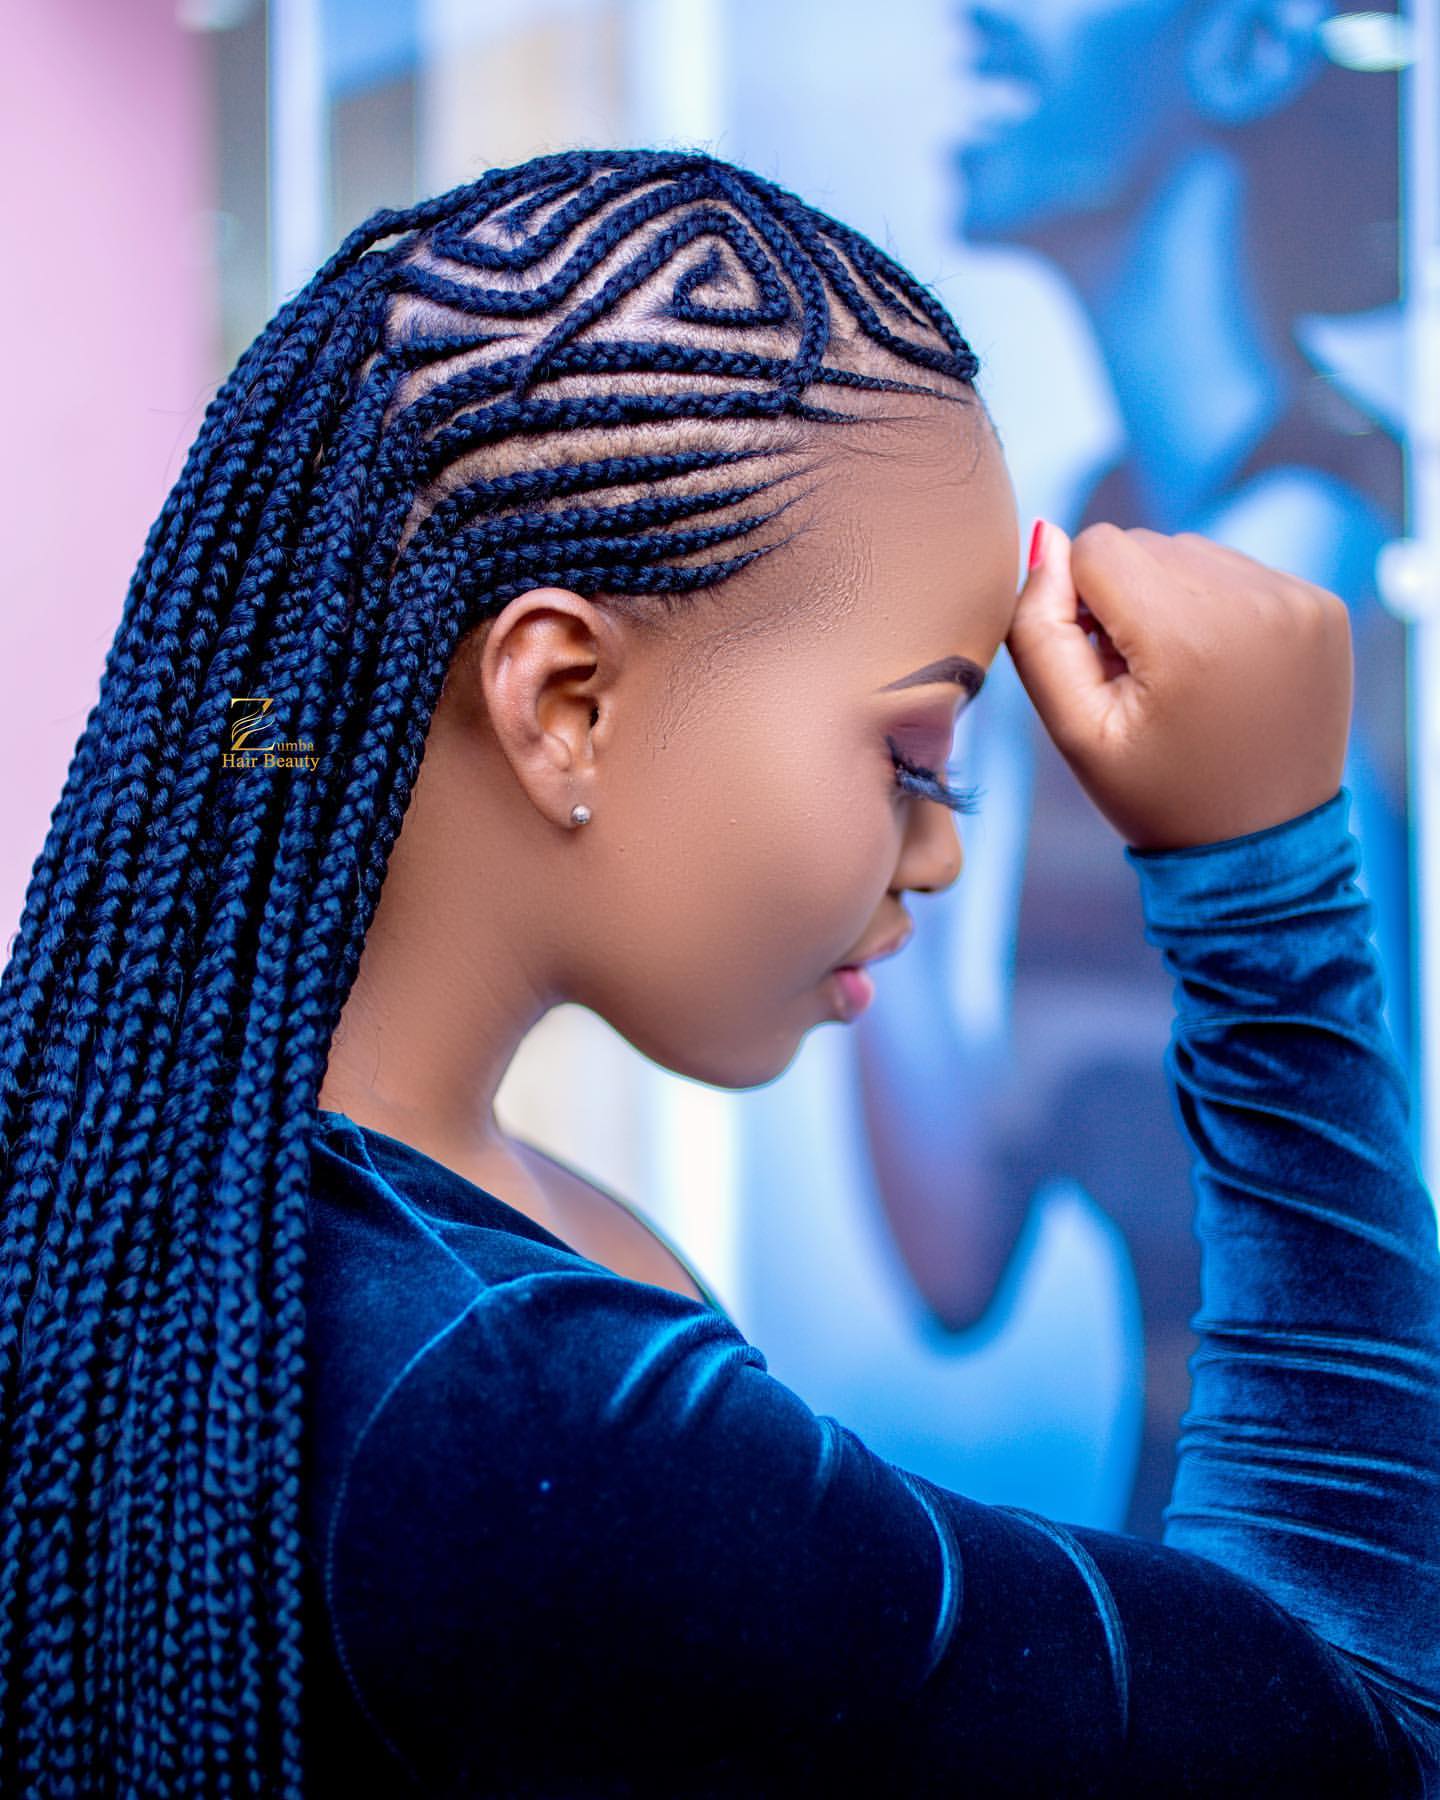 Creative Braided Hairstyle Ideas to Elevate Your Look